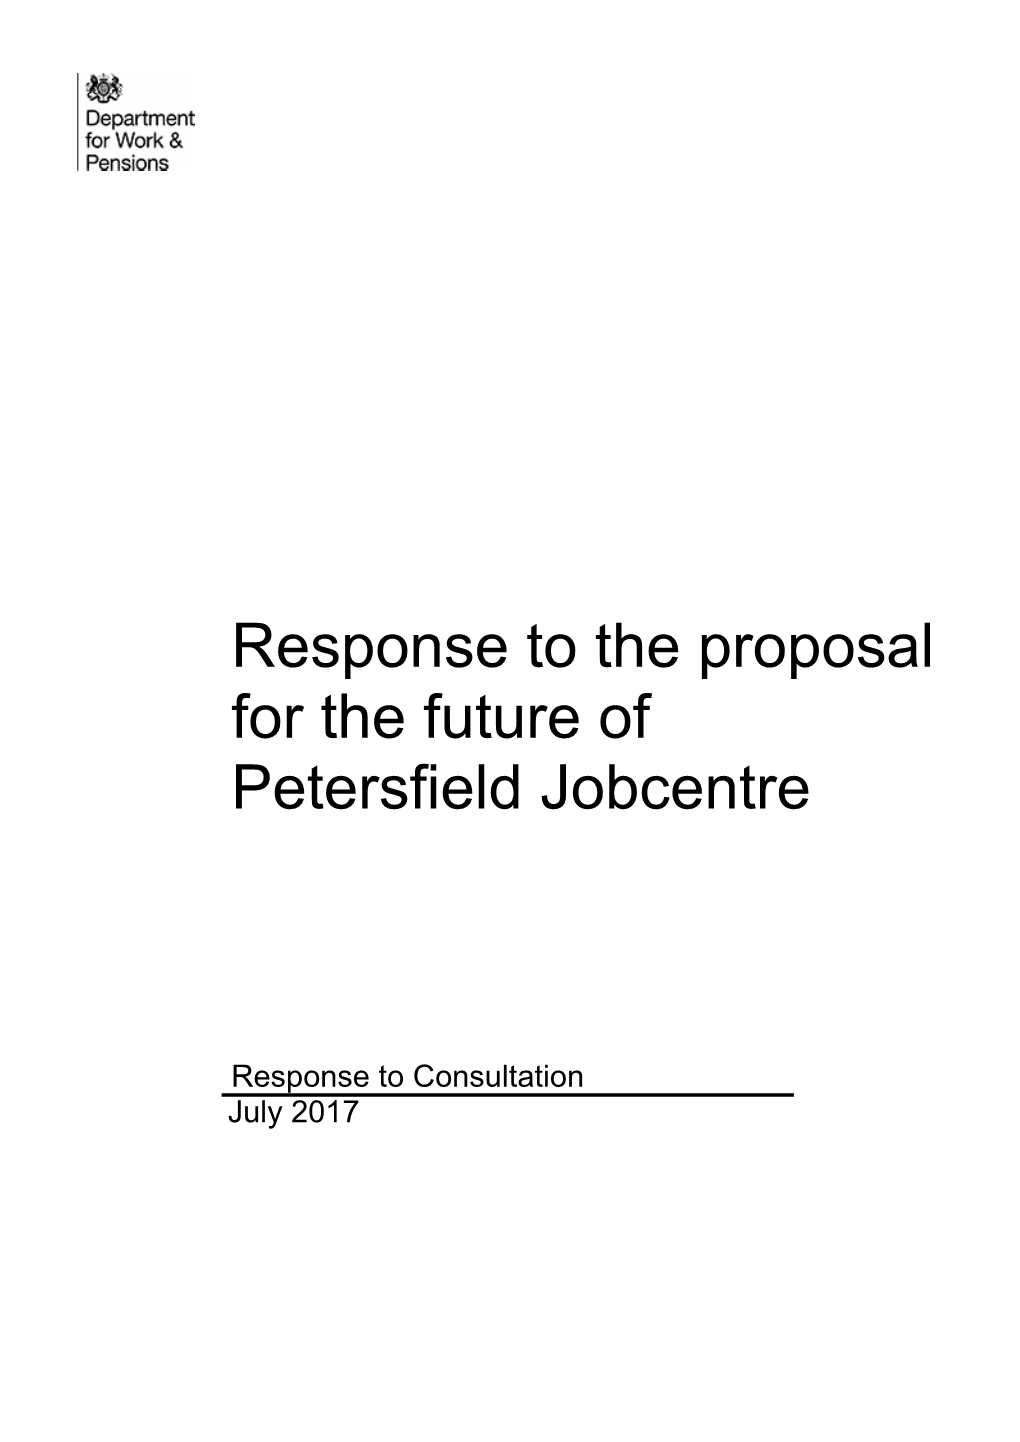 Response to the Proposal for the Future of Petersfield Jobcentre